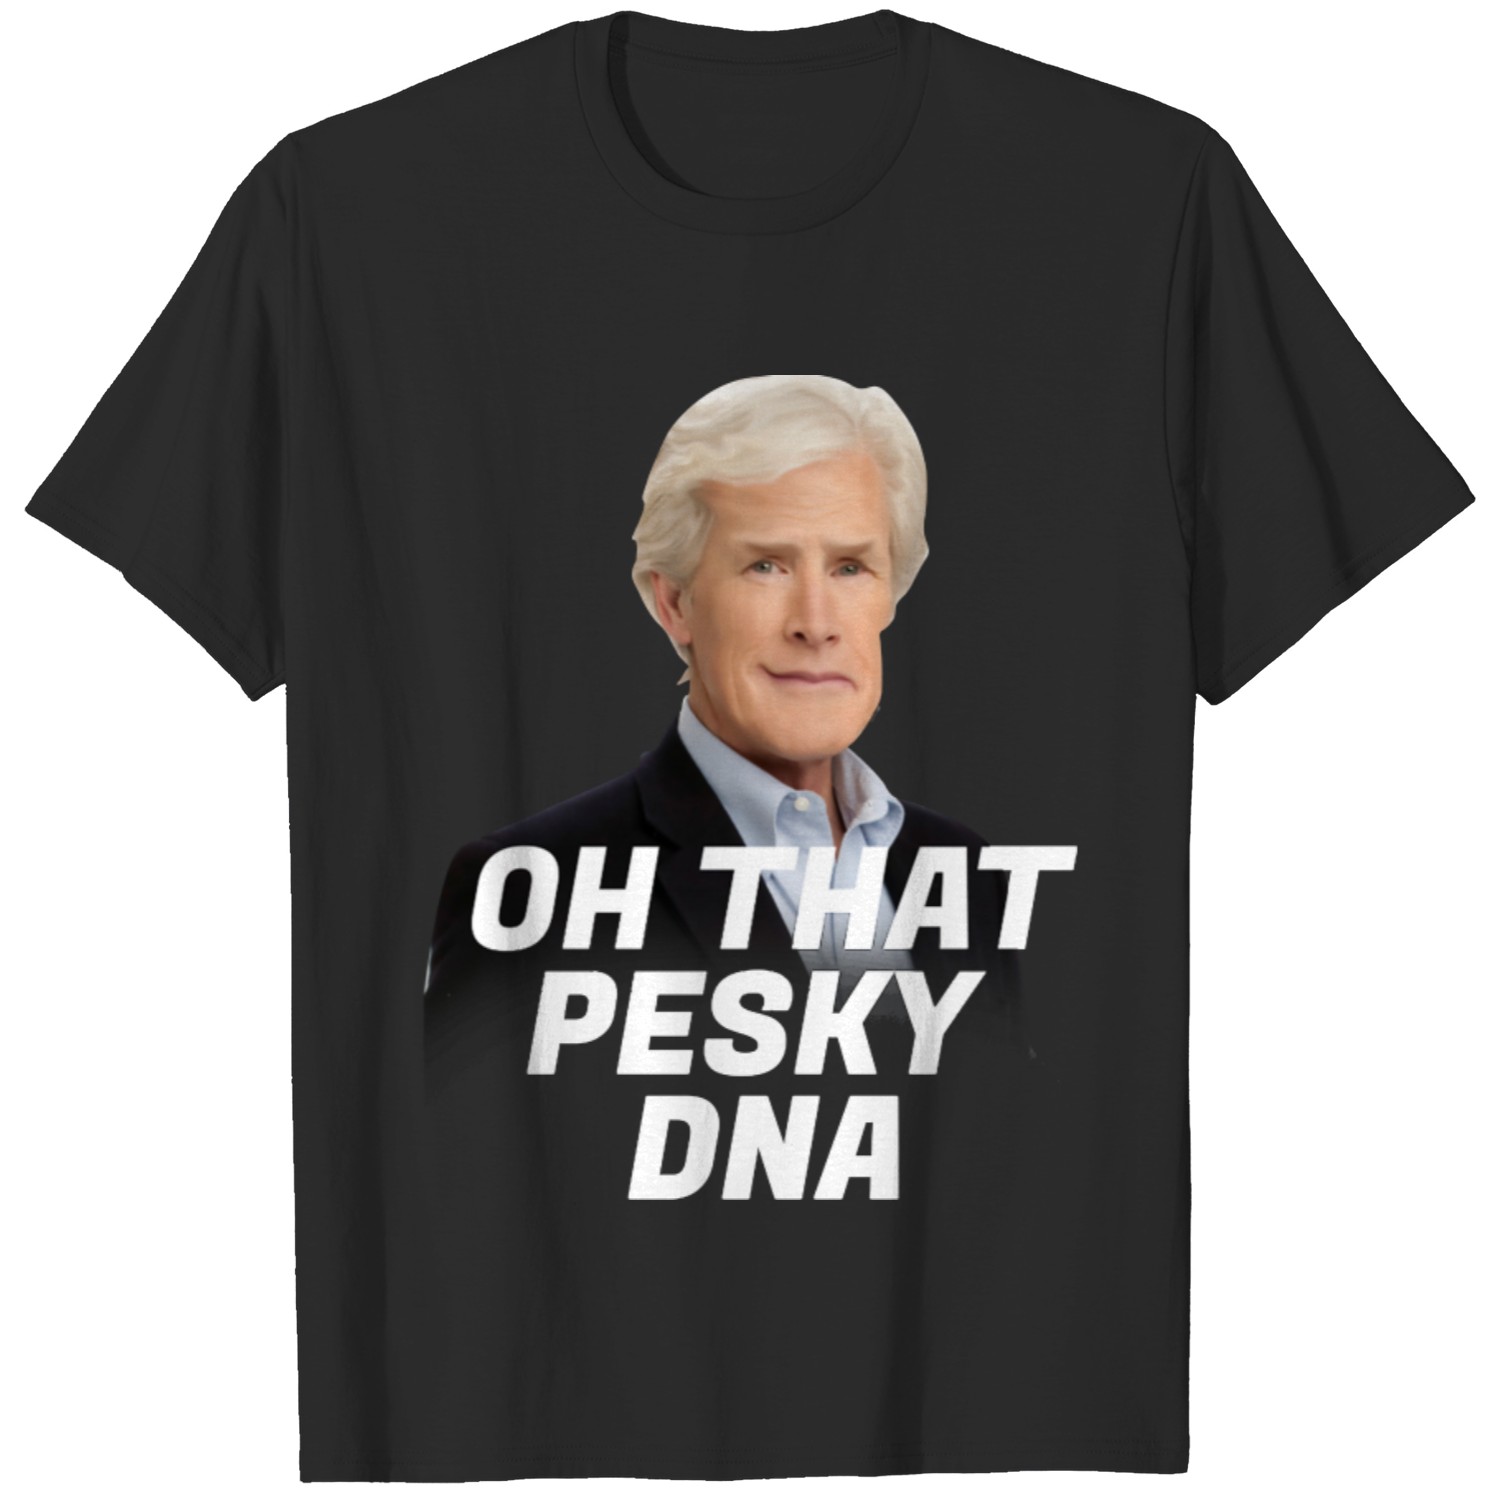 DNA T-Shirts in White